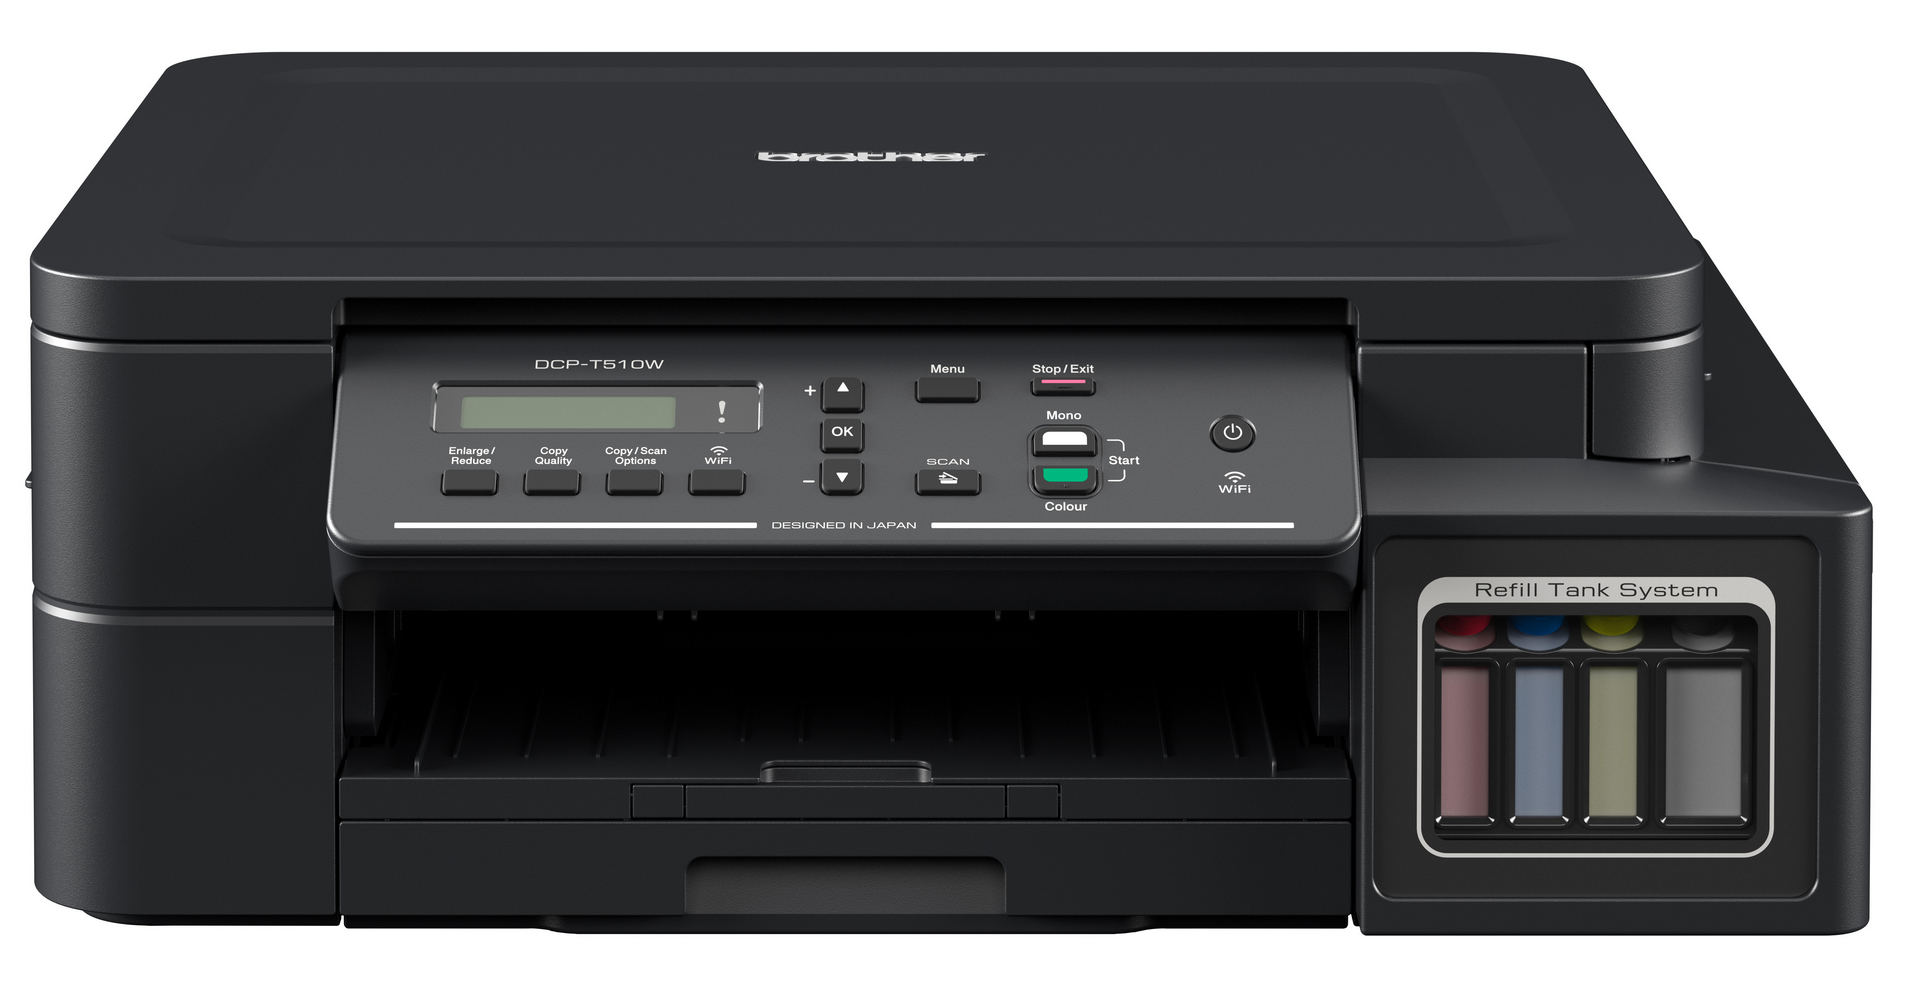 Бротхер принтер dcp. Brother DCP-t510w. МФУ brother DCP-t510w INKBENEFIT Plus. Принтер brother DCP t510w. МФУ brother DCP-t310 INKBENEFIT Plus.